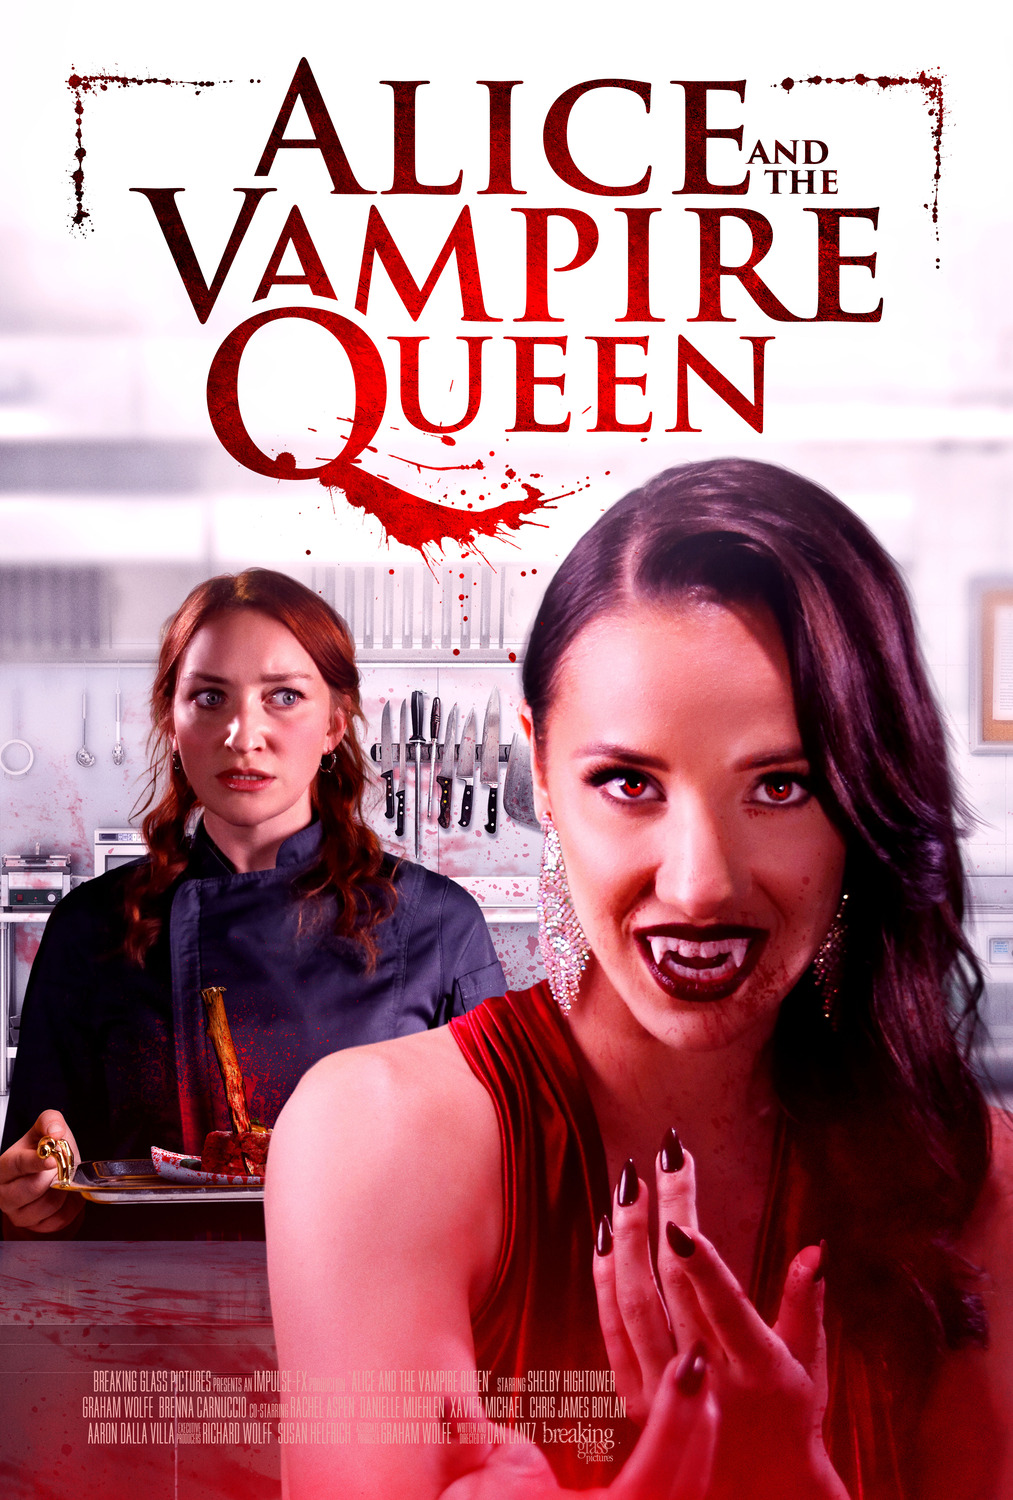 Alice and the Vampire Queen (#2 of 2): Extra Large Movie Poster